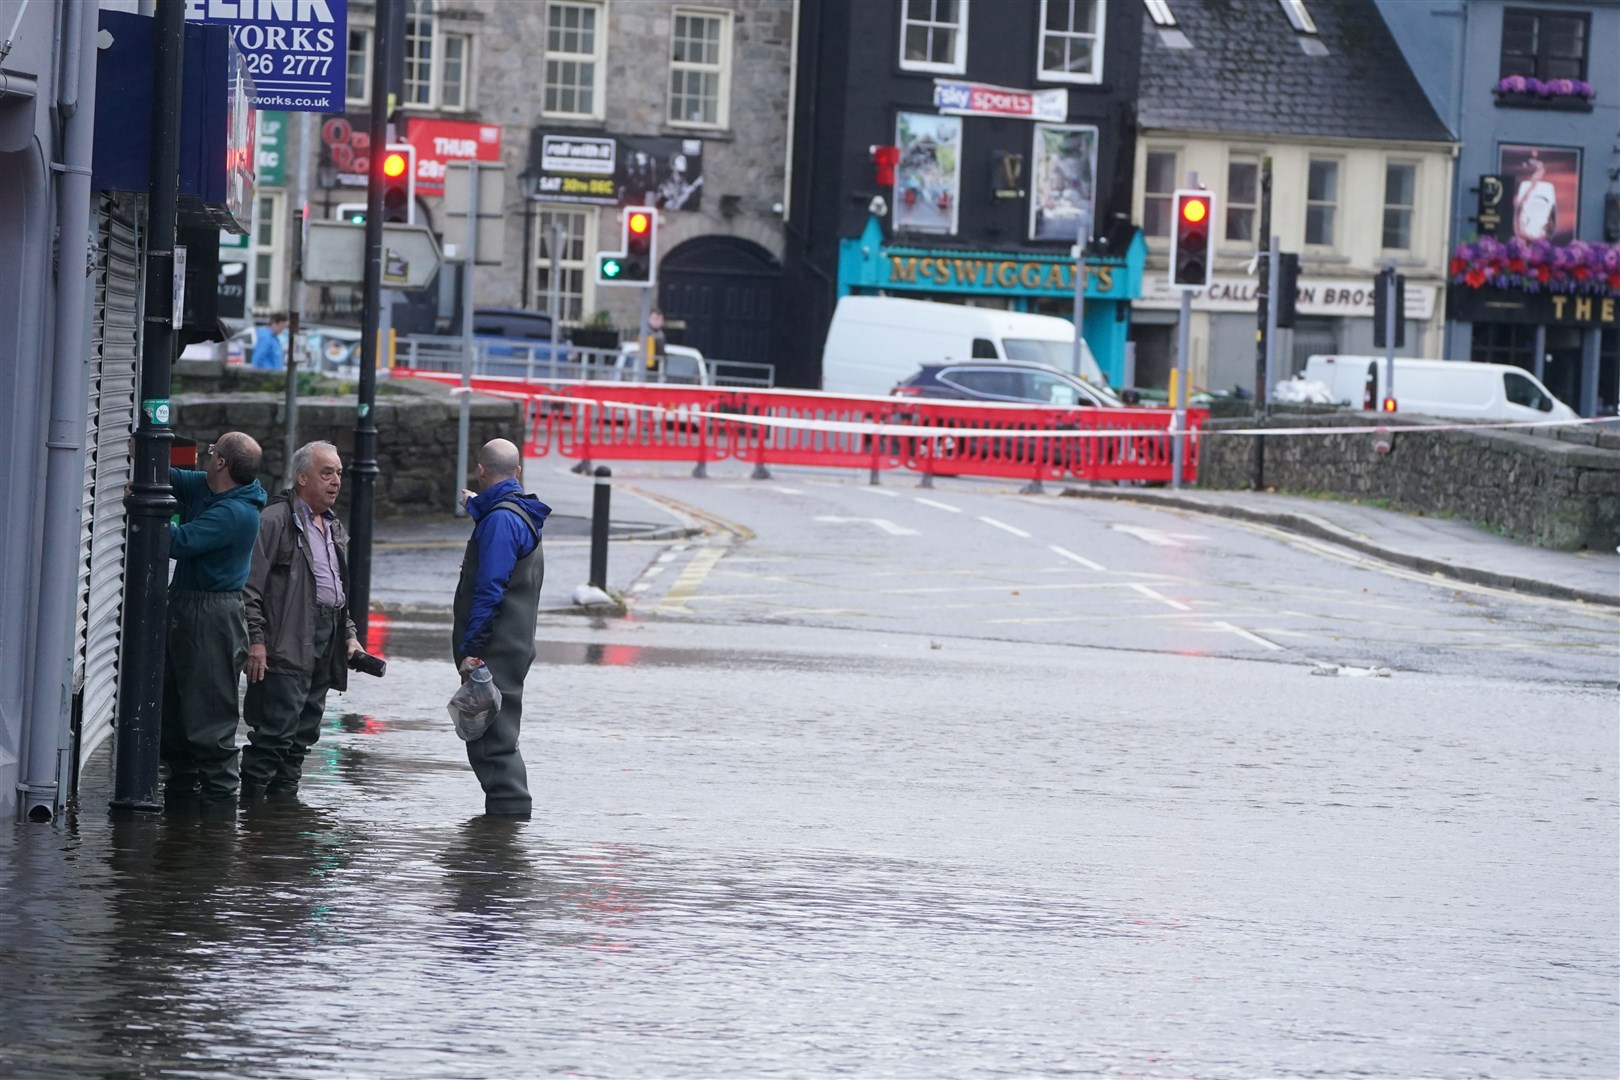 Newry’s canal burst its banks (Brian Lawless/PA)